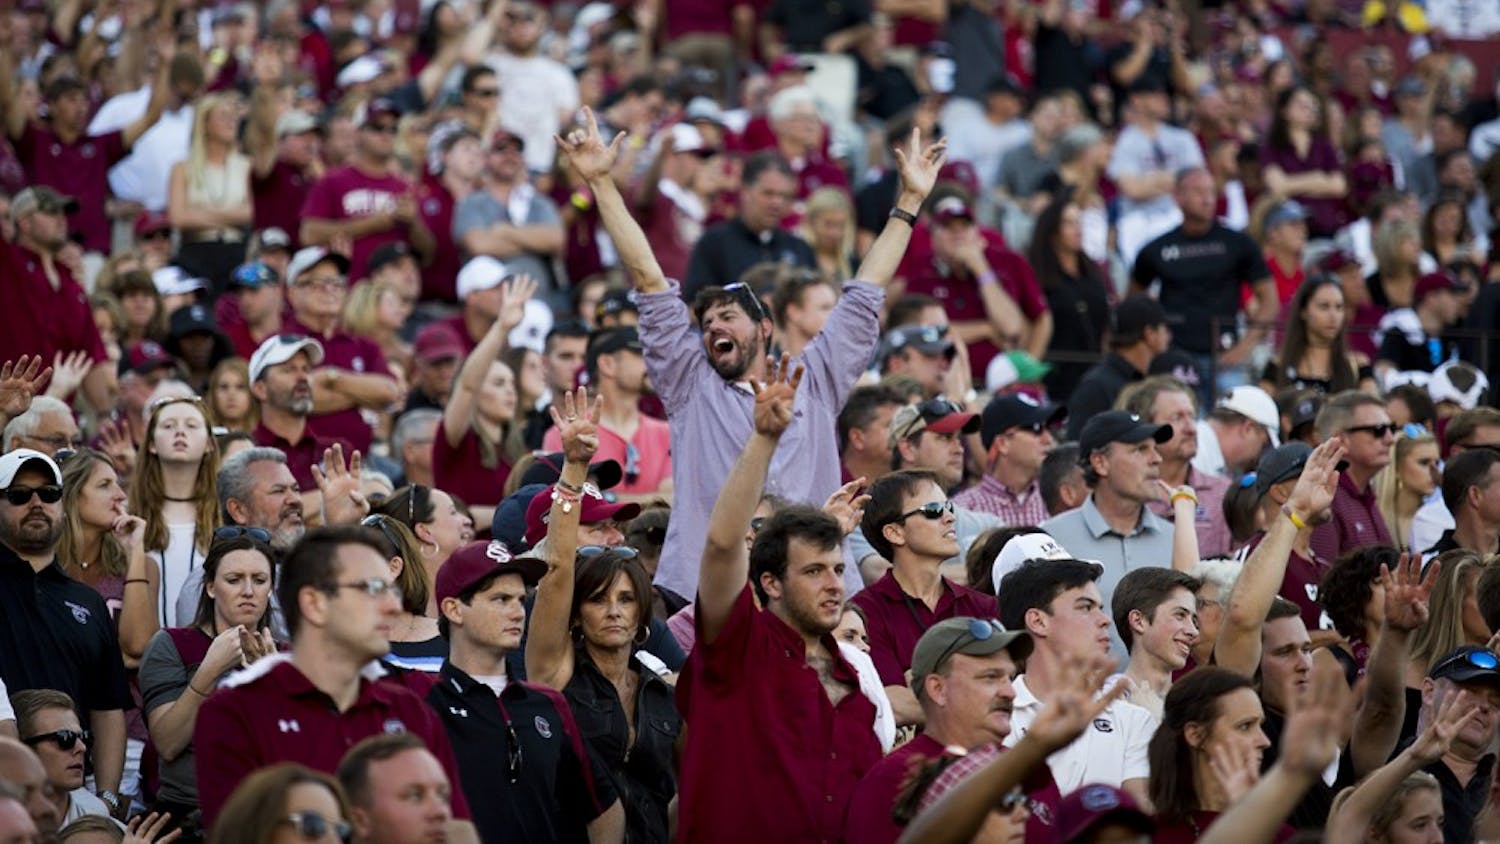 Gamecocks celebrate at the 2016 game against Texas A&M.